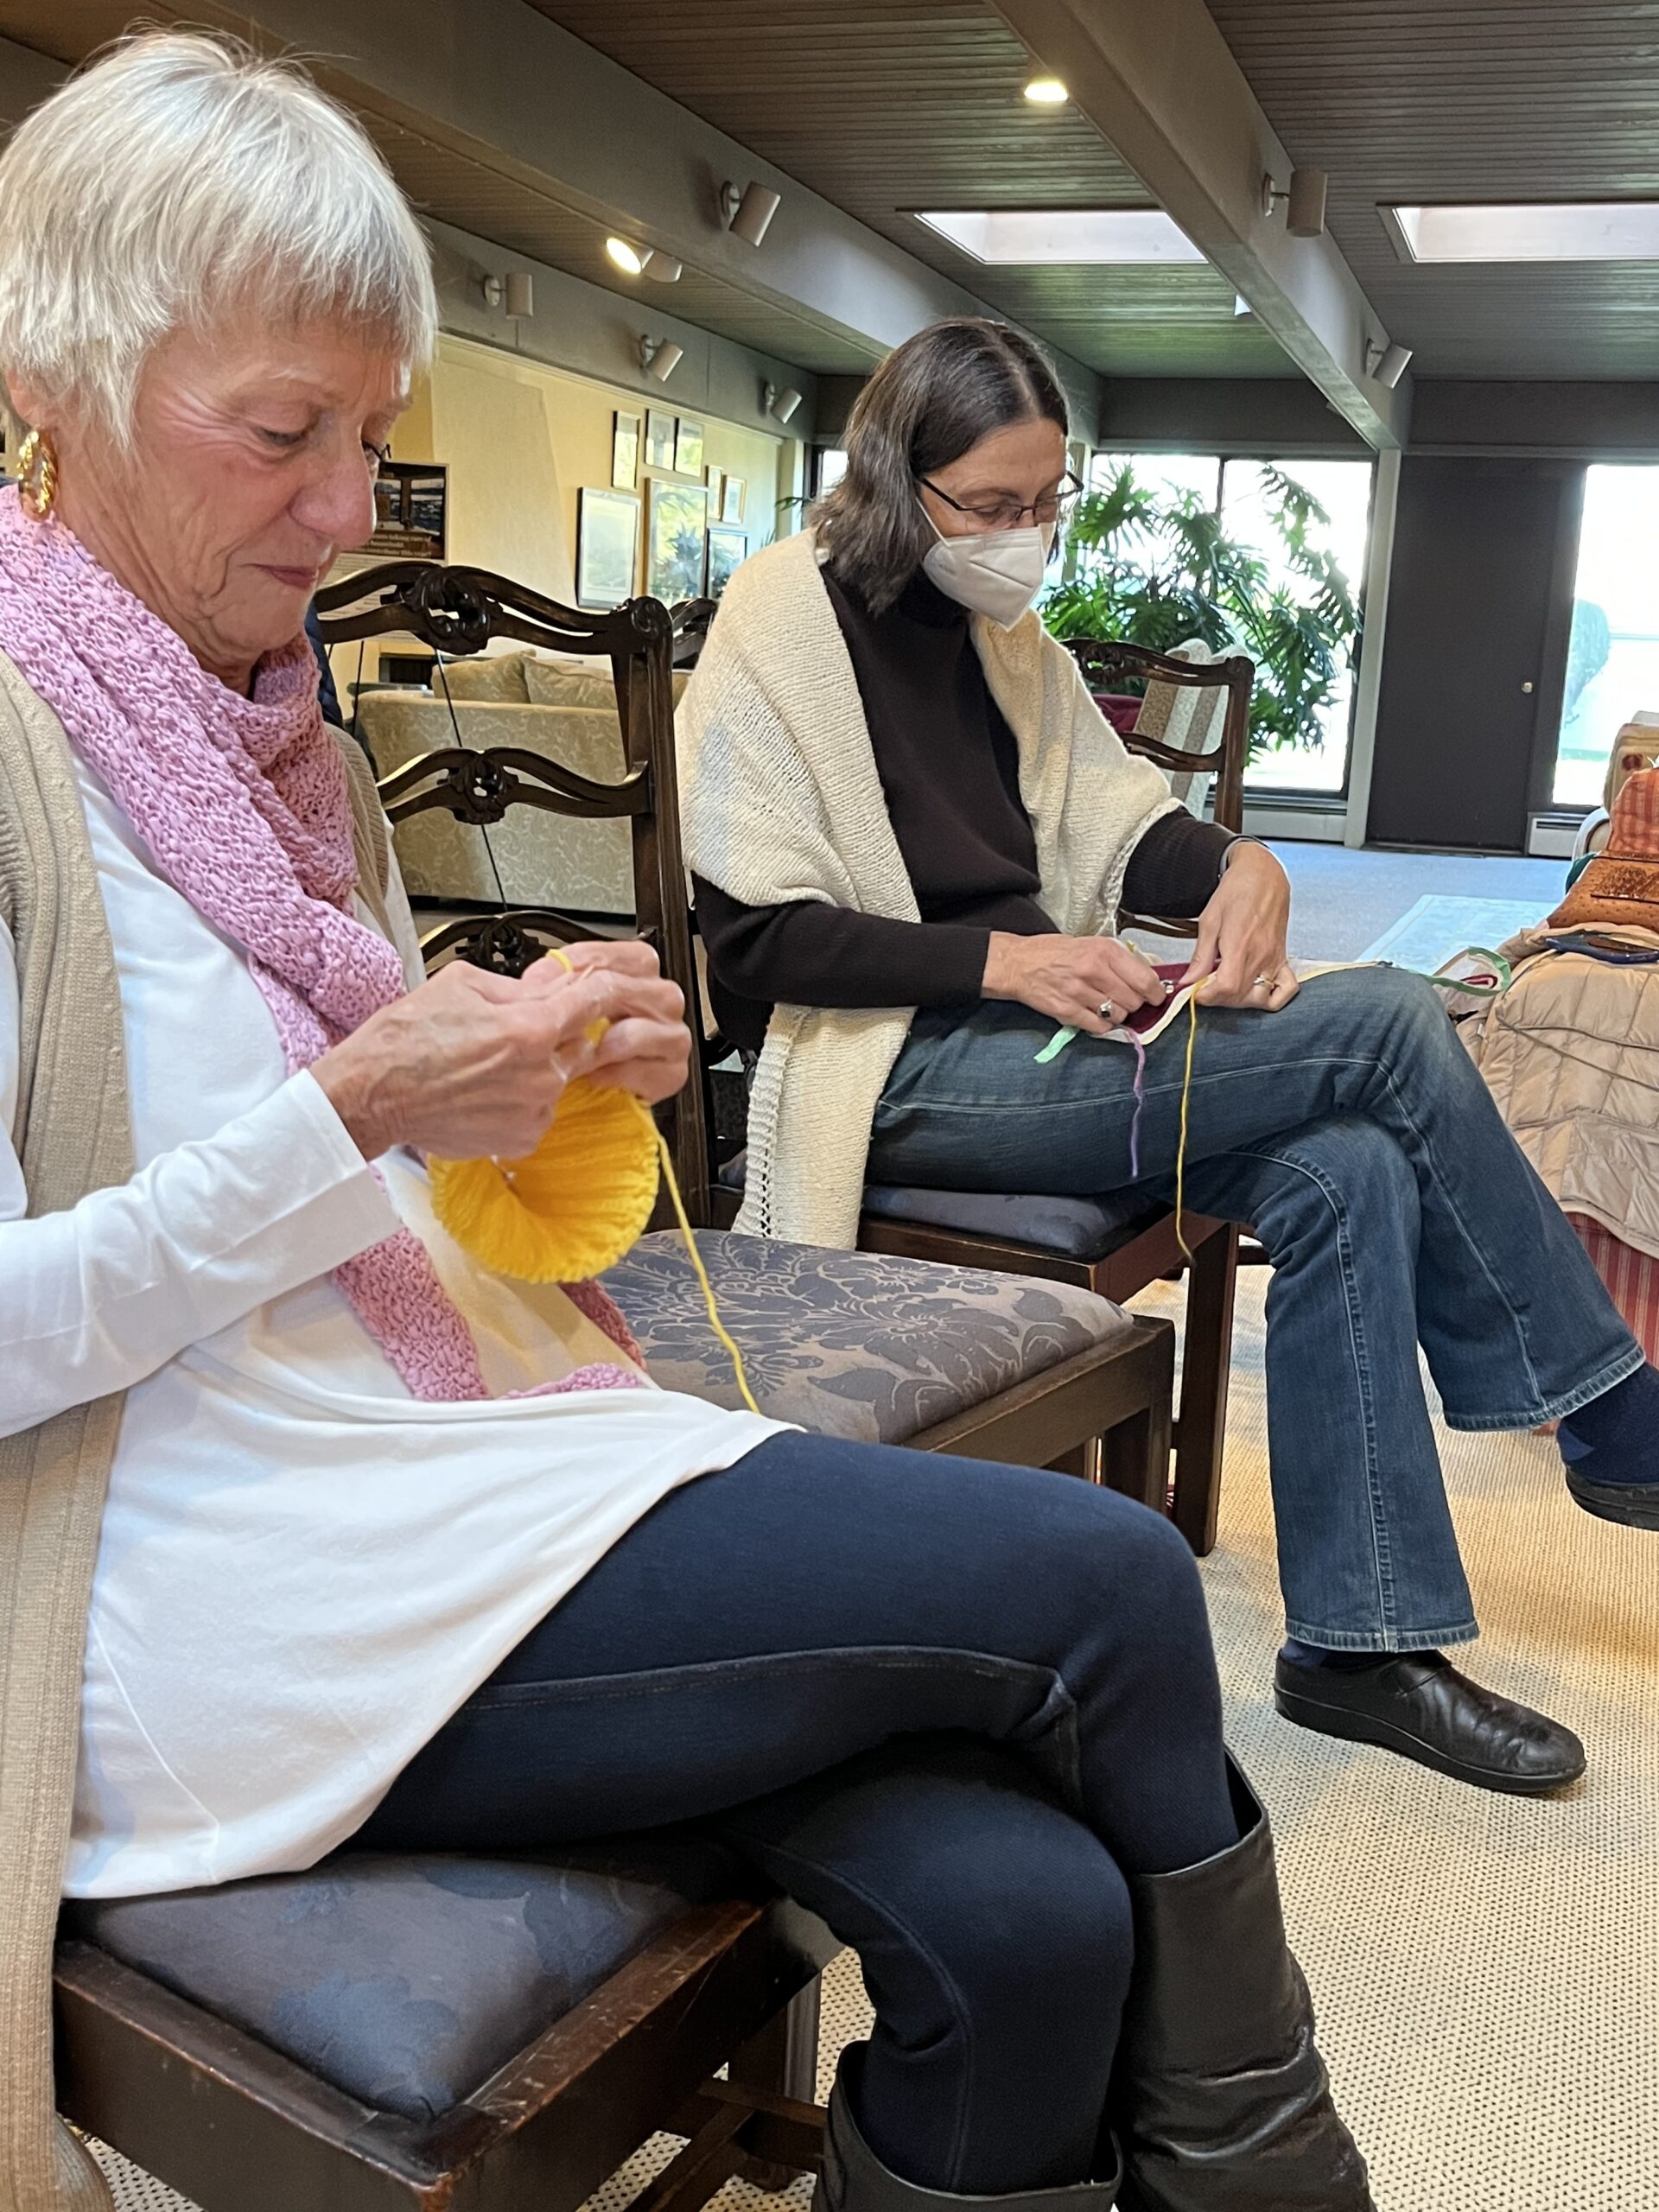 Barbara Albrecht knitting a yellow hat to be donated. Next to her, Ellen Greaves works on a needlepoint stitch for a seat cover to be donated to St. John’s Episcopal Church. ELIZABETH VESPE